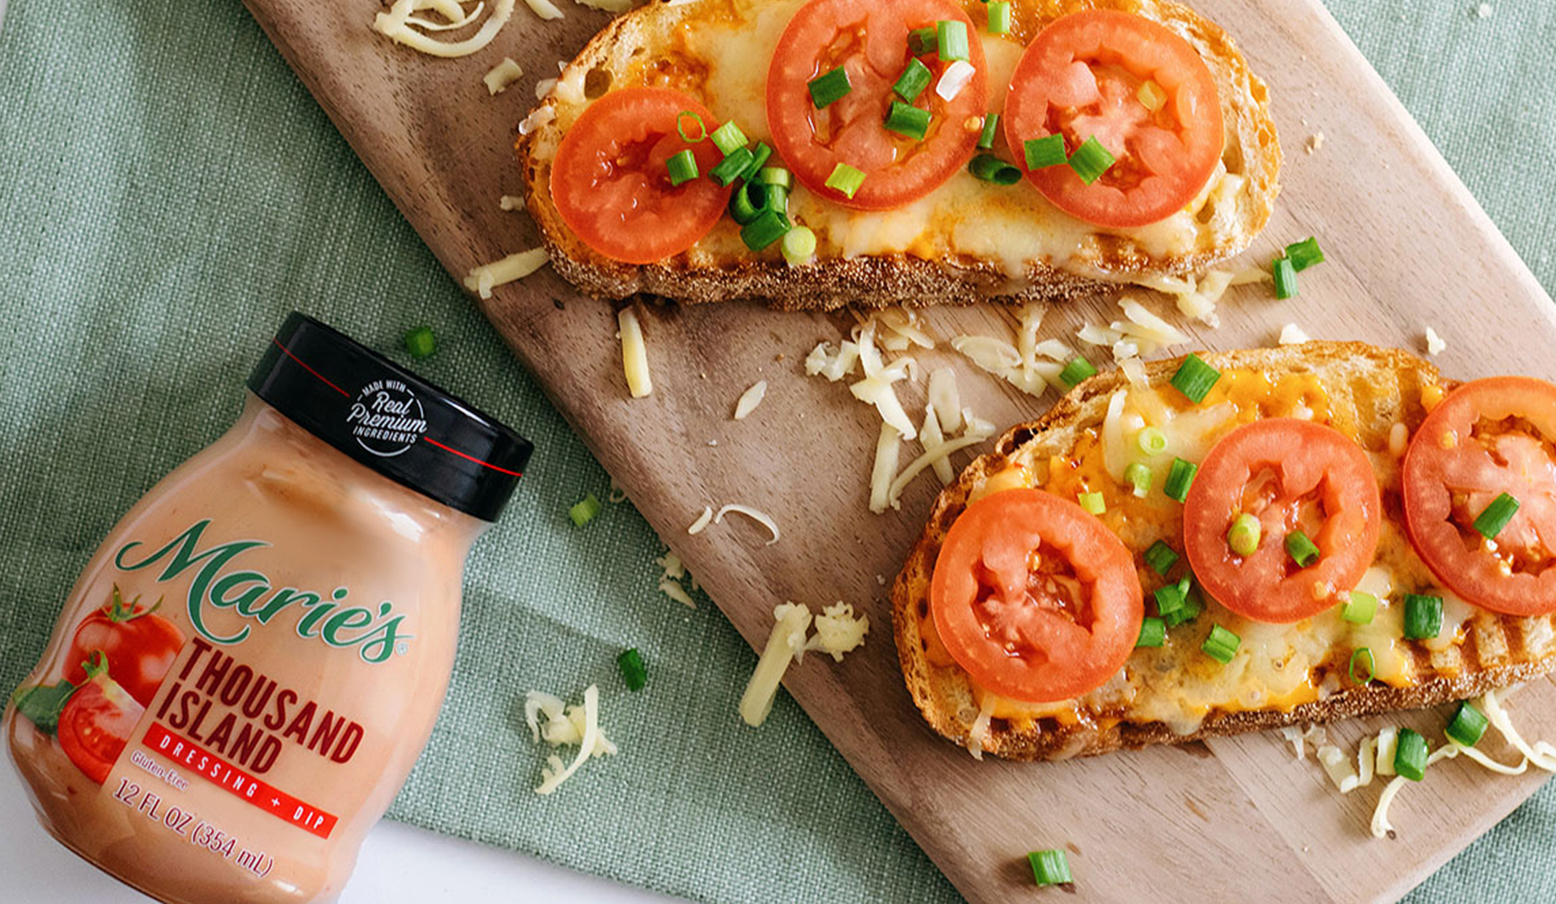 Melty Cheese and Tomato Sandwiches is made with Marie’s Thousand Island dressing.